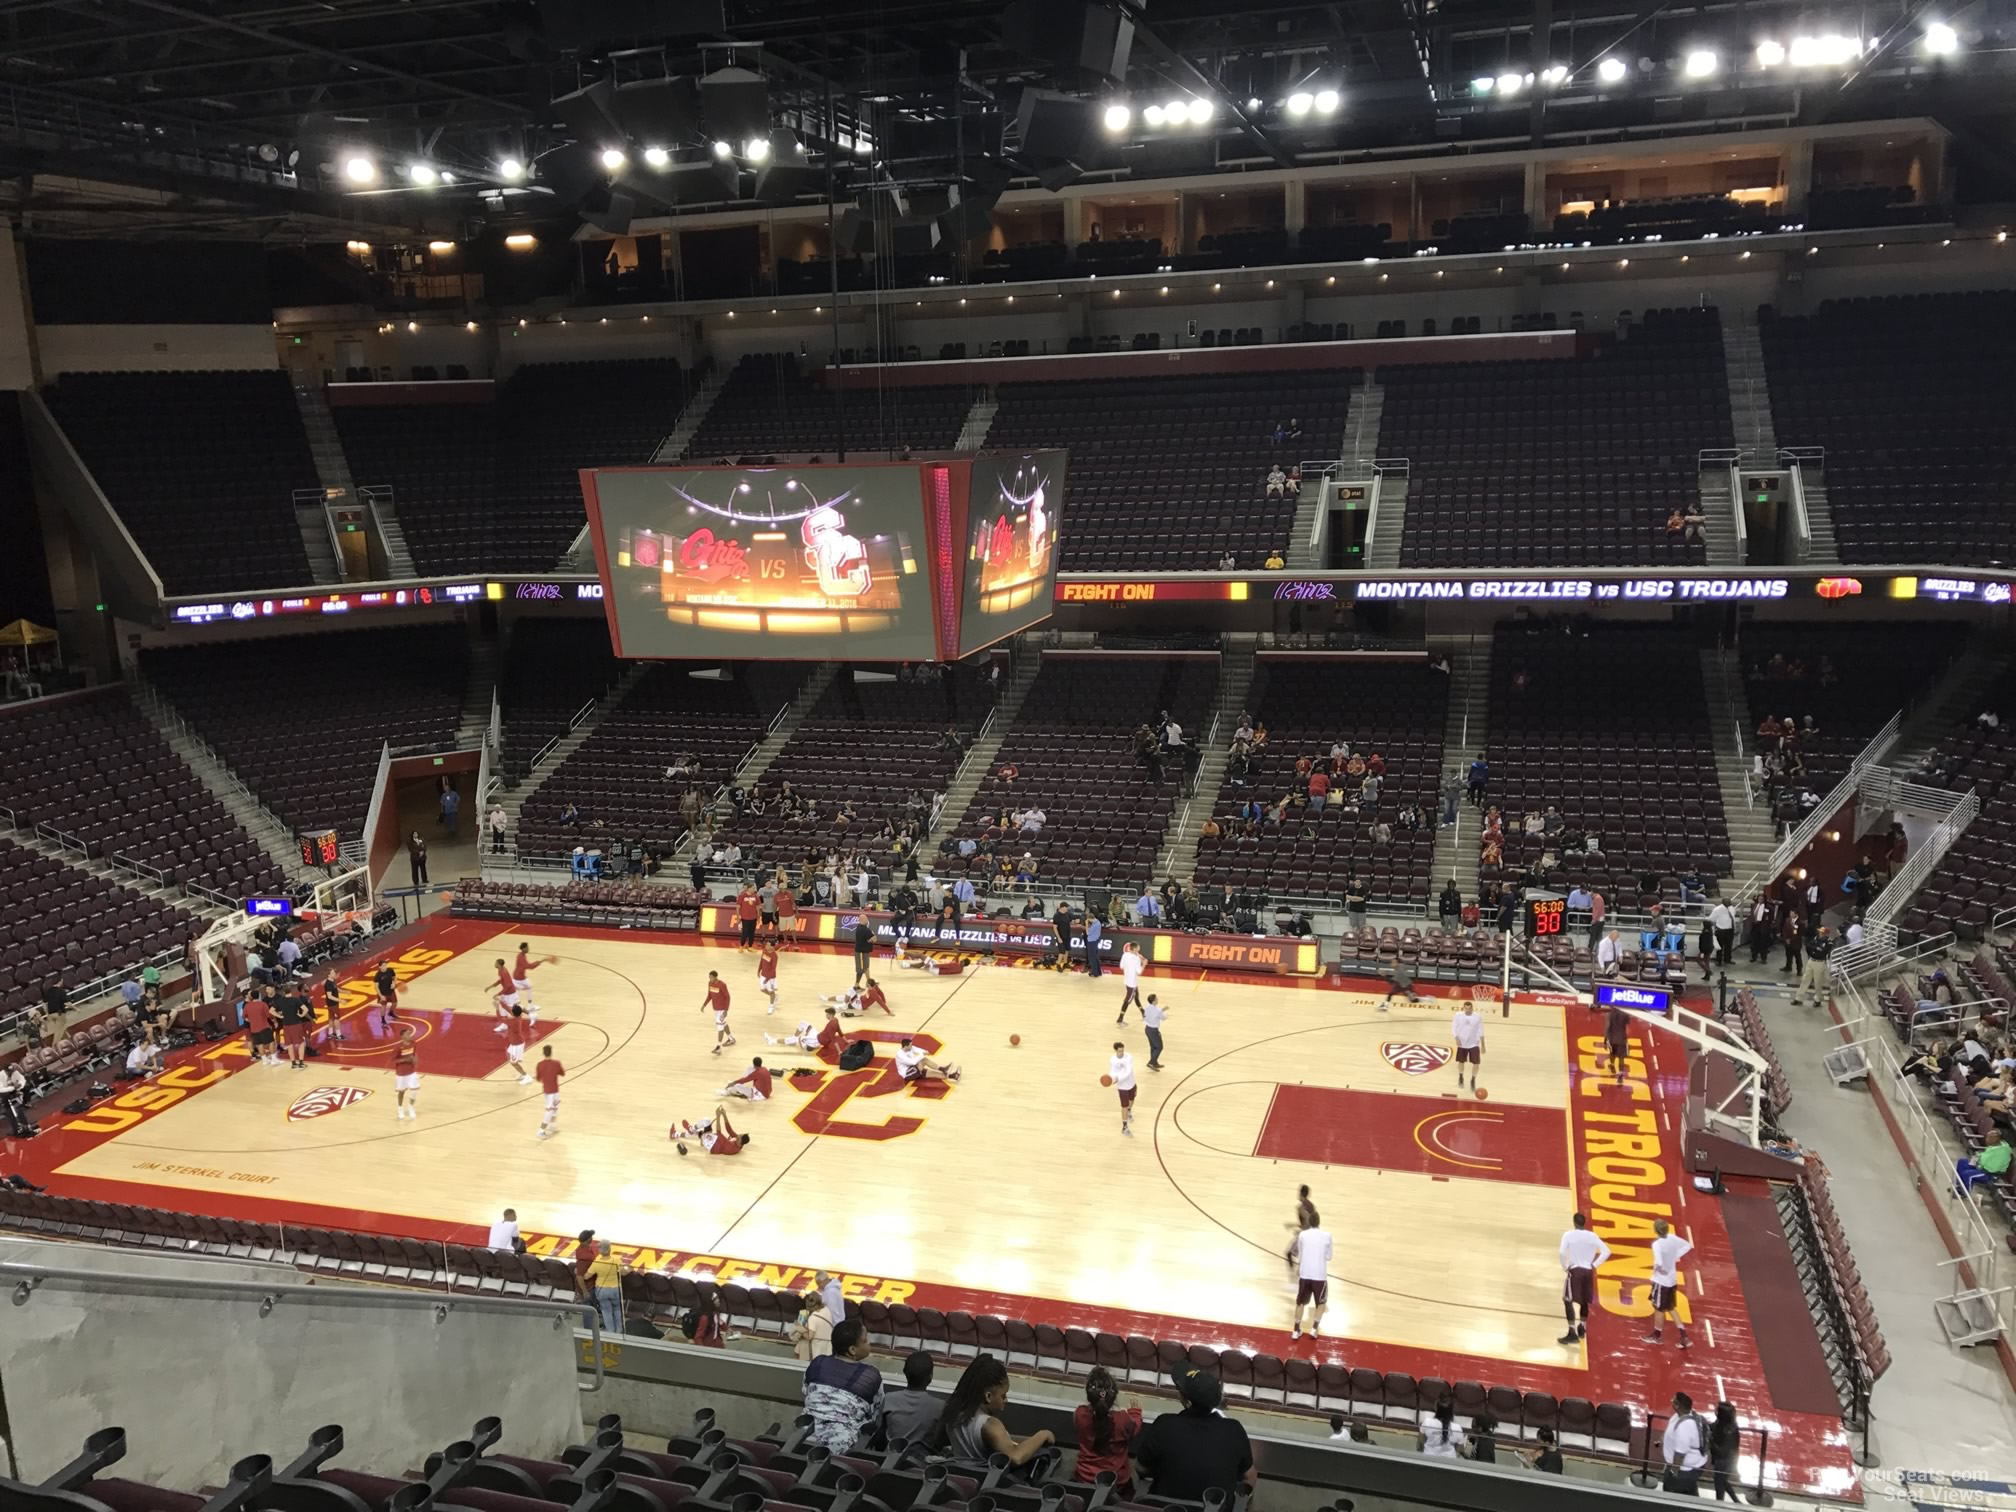 section 206, row 10 seat view  - galen center